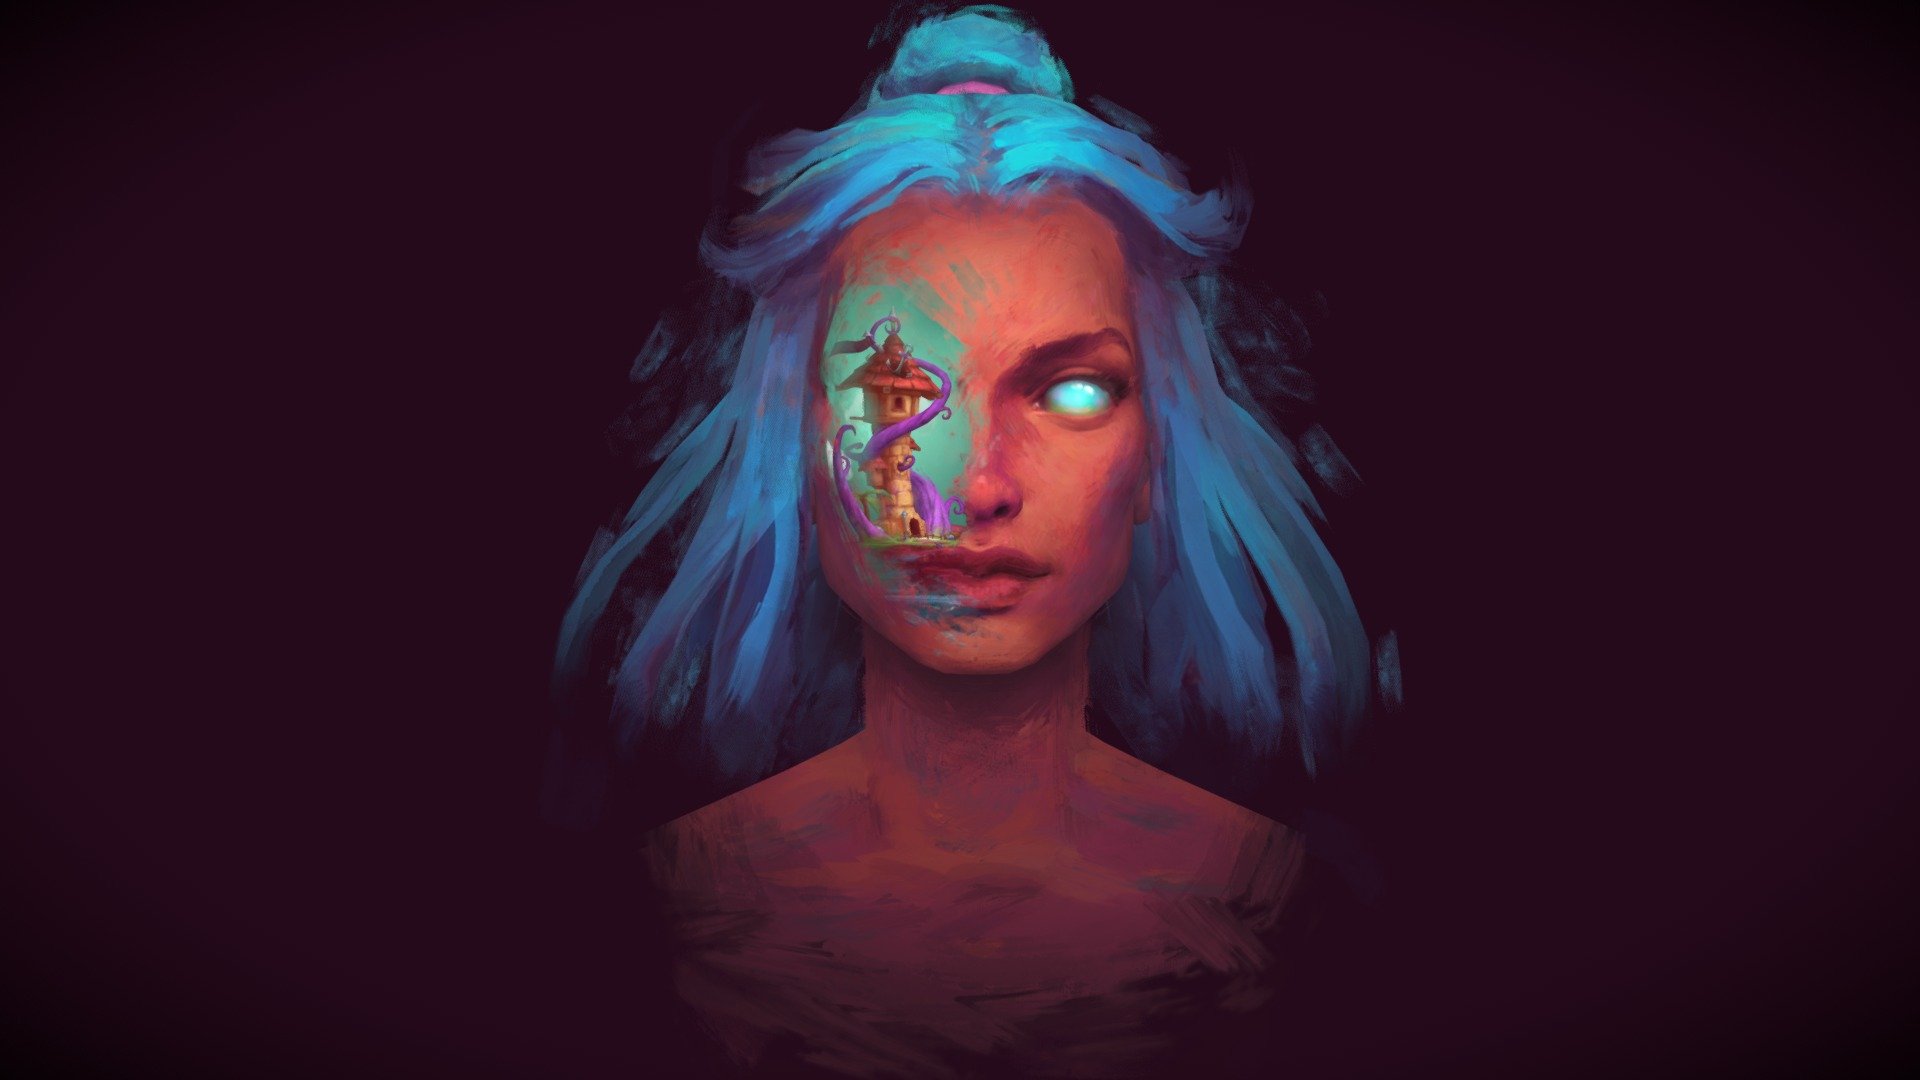 music video and tutorial can be found on artstation:
https://www.artstation.com/artwork/N5q3bd

an experiment I wanted to make for the longest time, aand now its done! :D its a pretttty personal piece, and was very addicting to work on it, I hope you find joy in the outcome! - Phoenix - 3D model by Miki Bencz (@cordero) 3d model